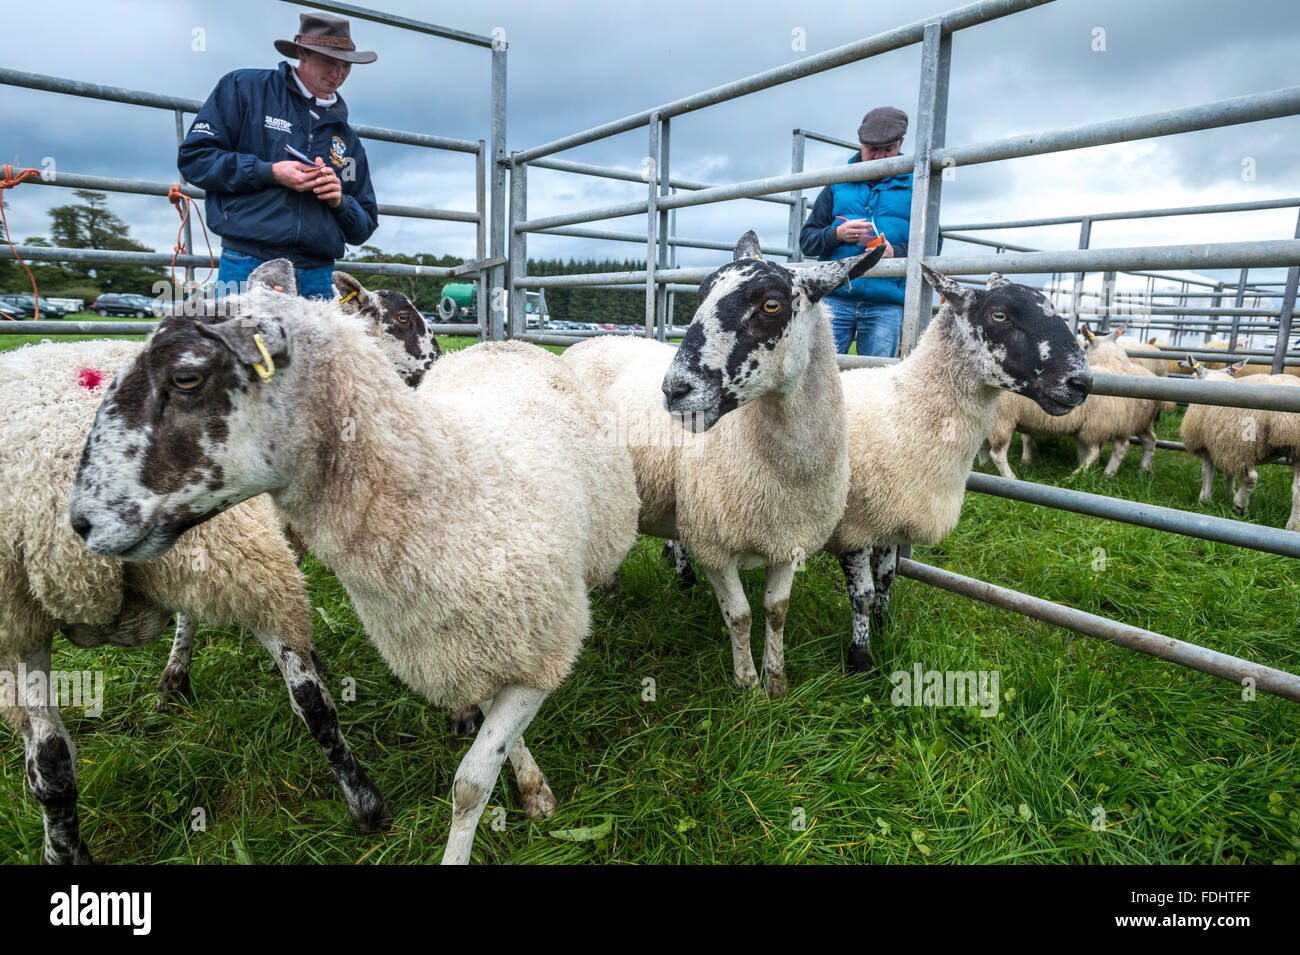 Sheep in their pens at the International Sheepdog Trials in Moffat, Scotland, UK. Stock Photo